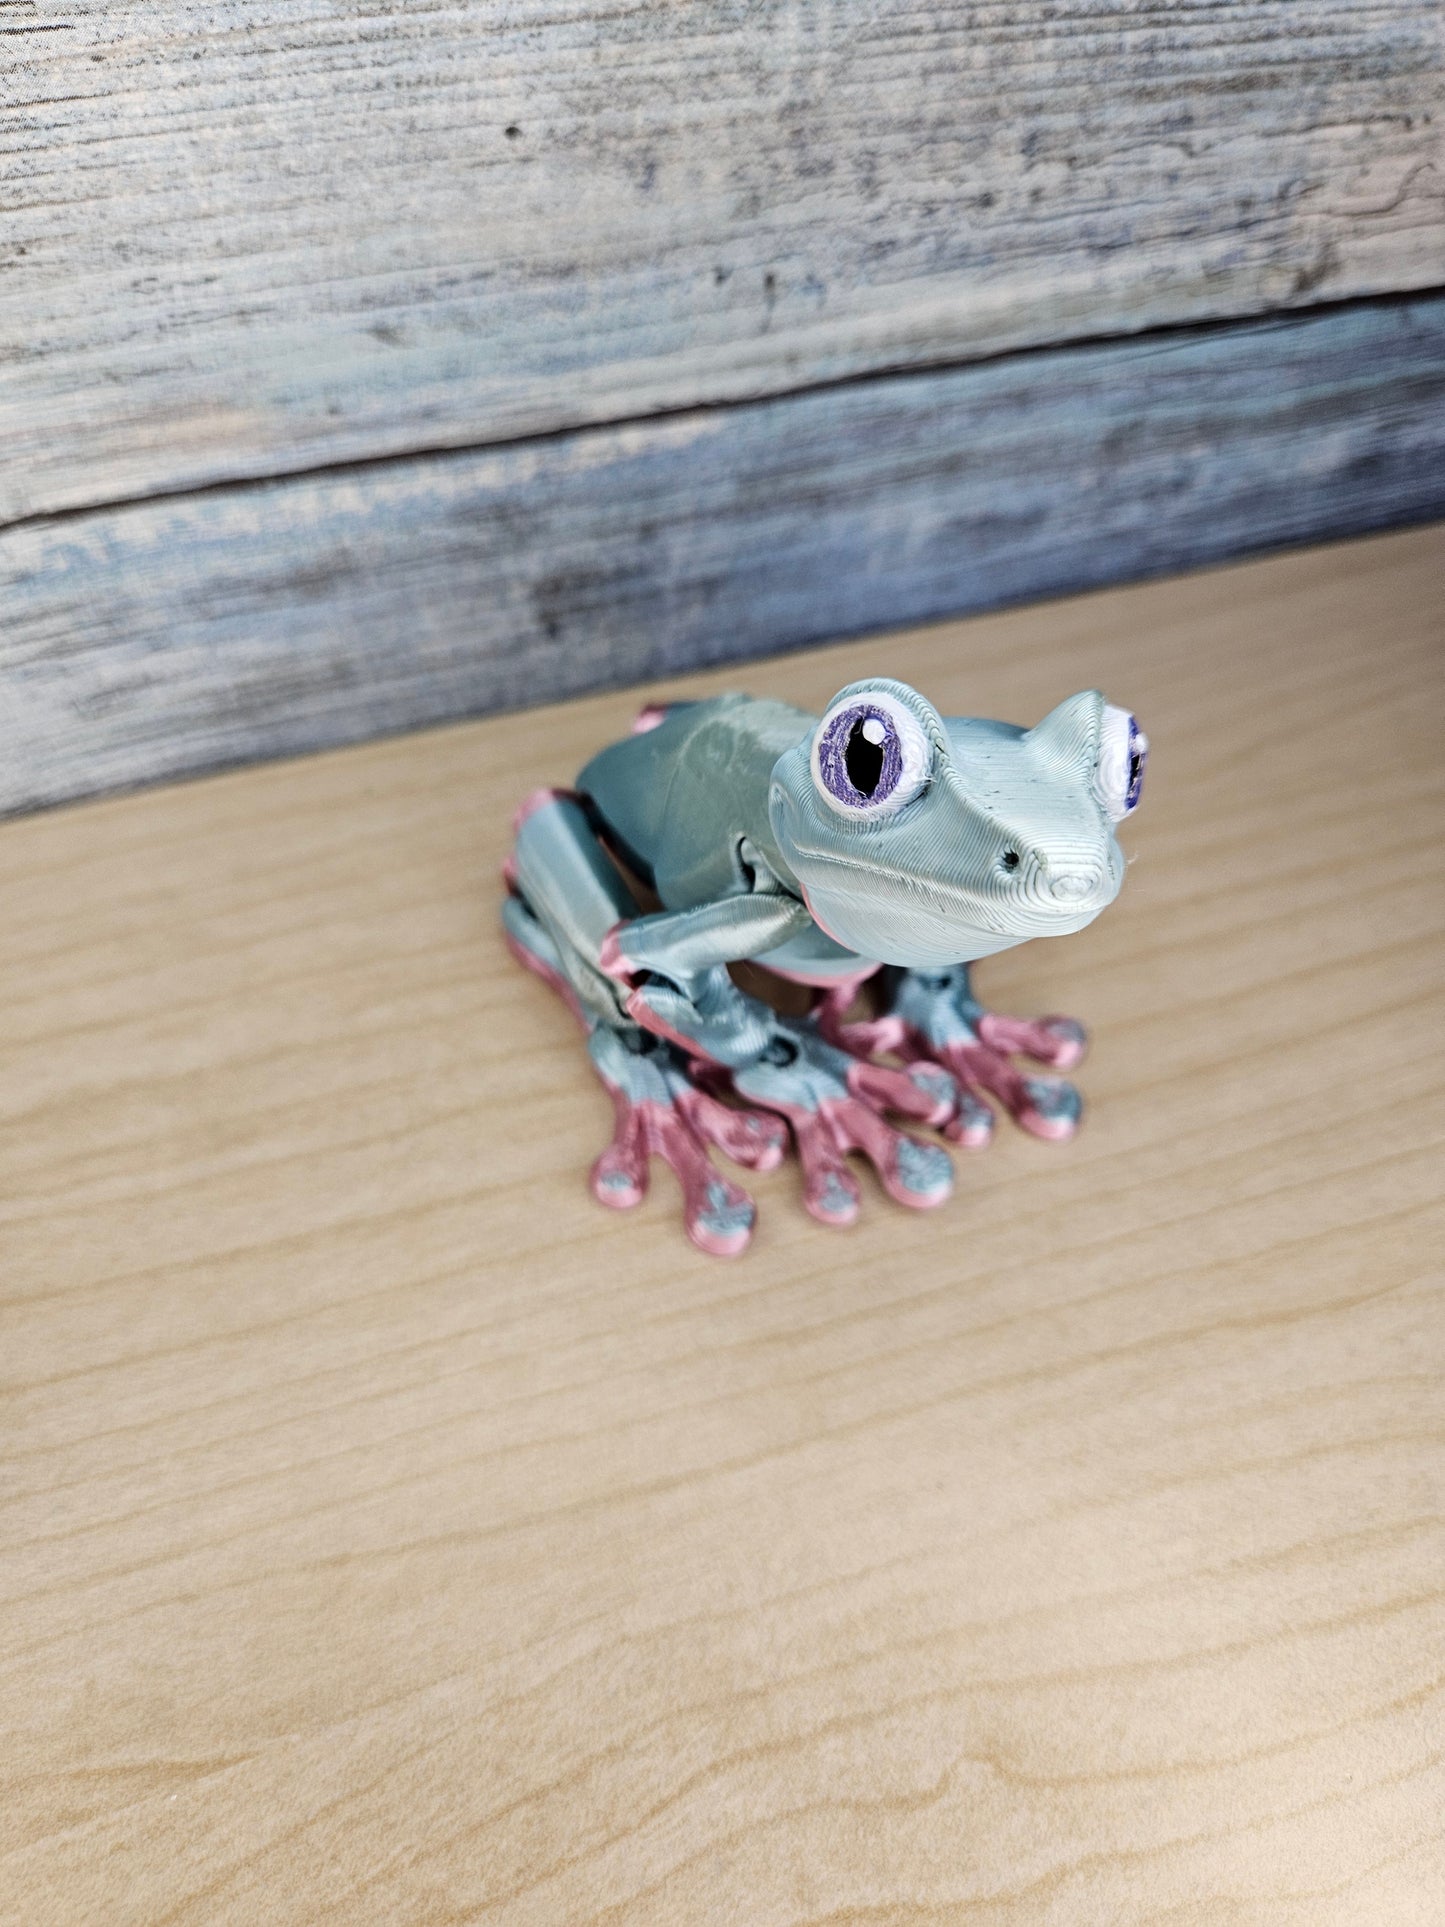 Flexi Tree Frog with Magnets!